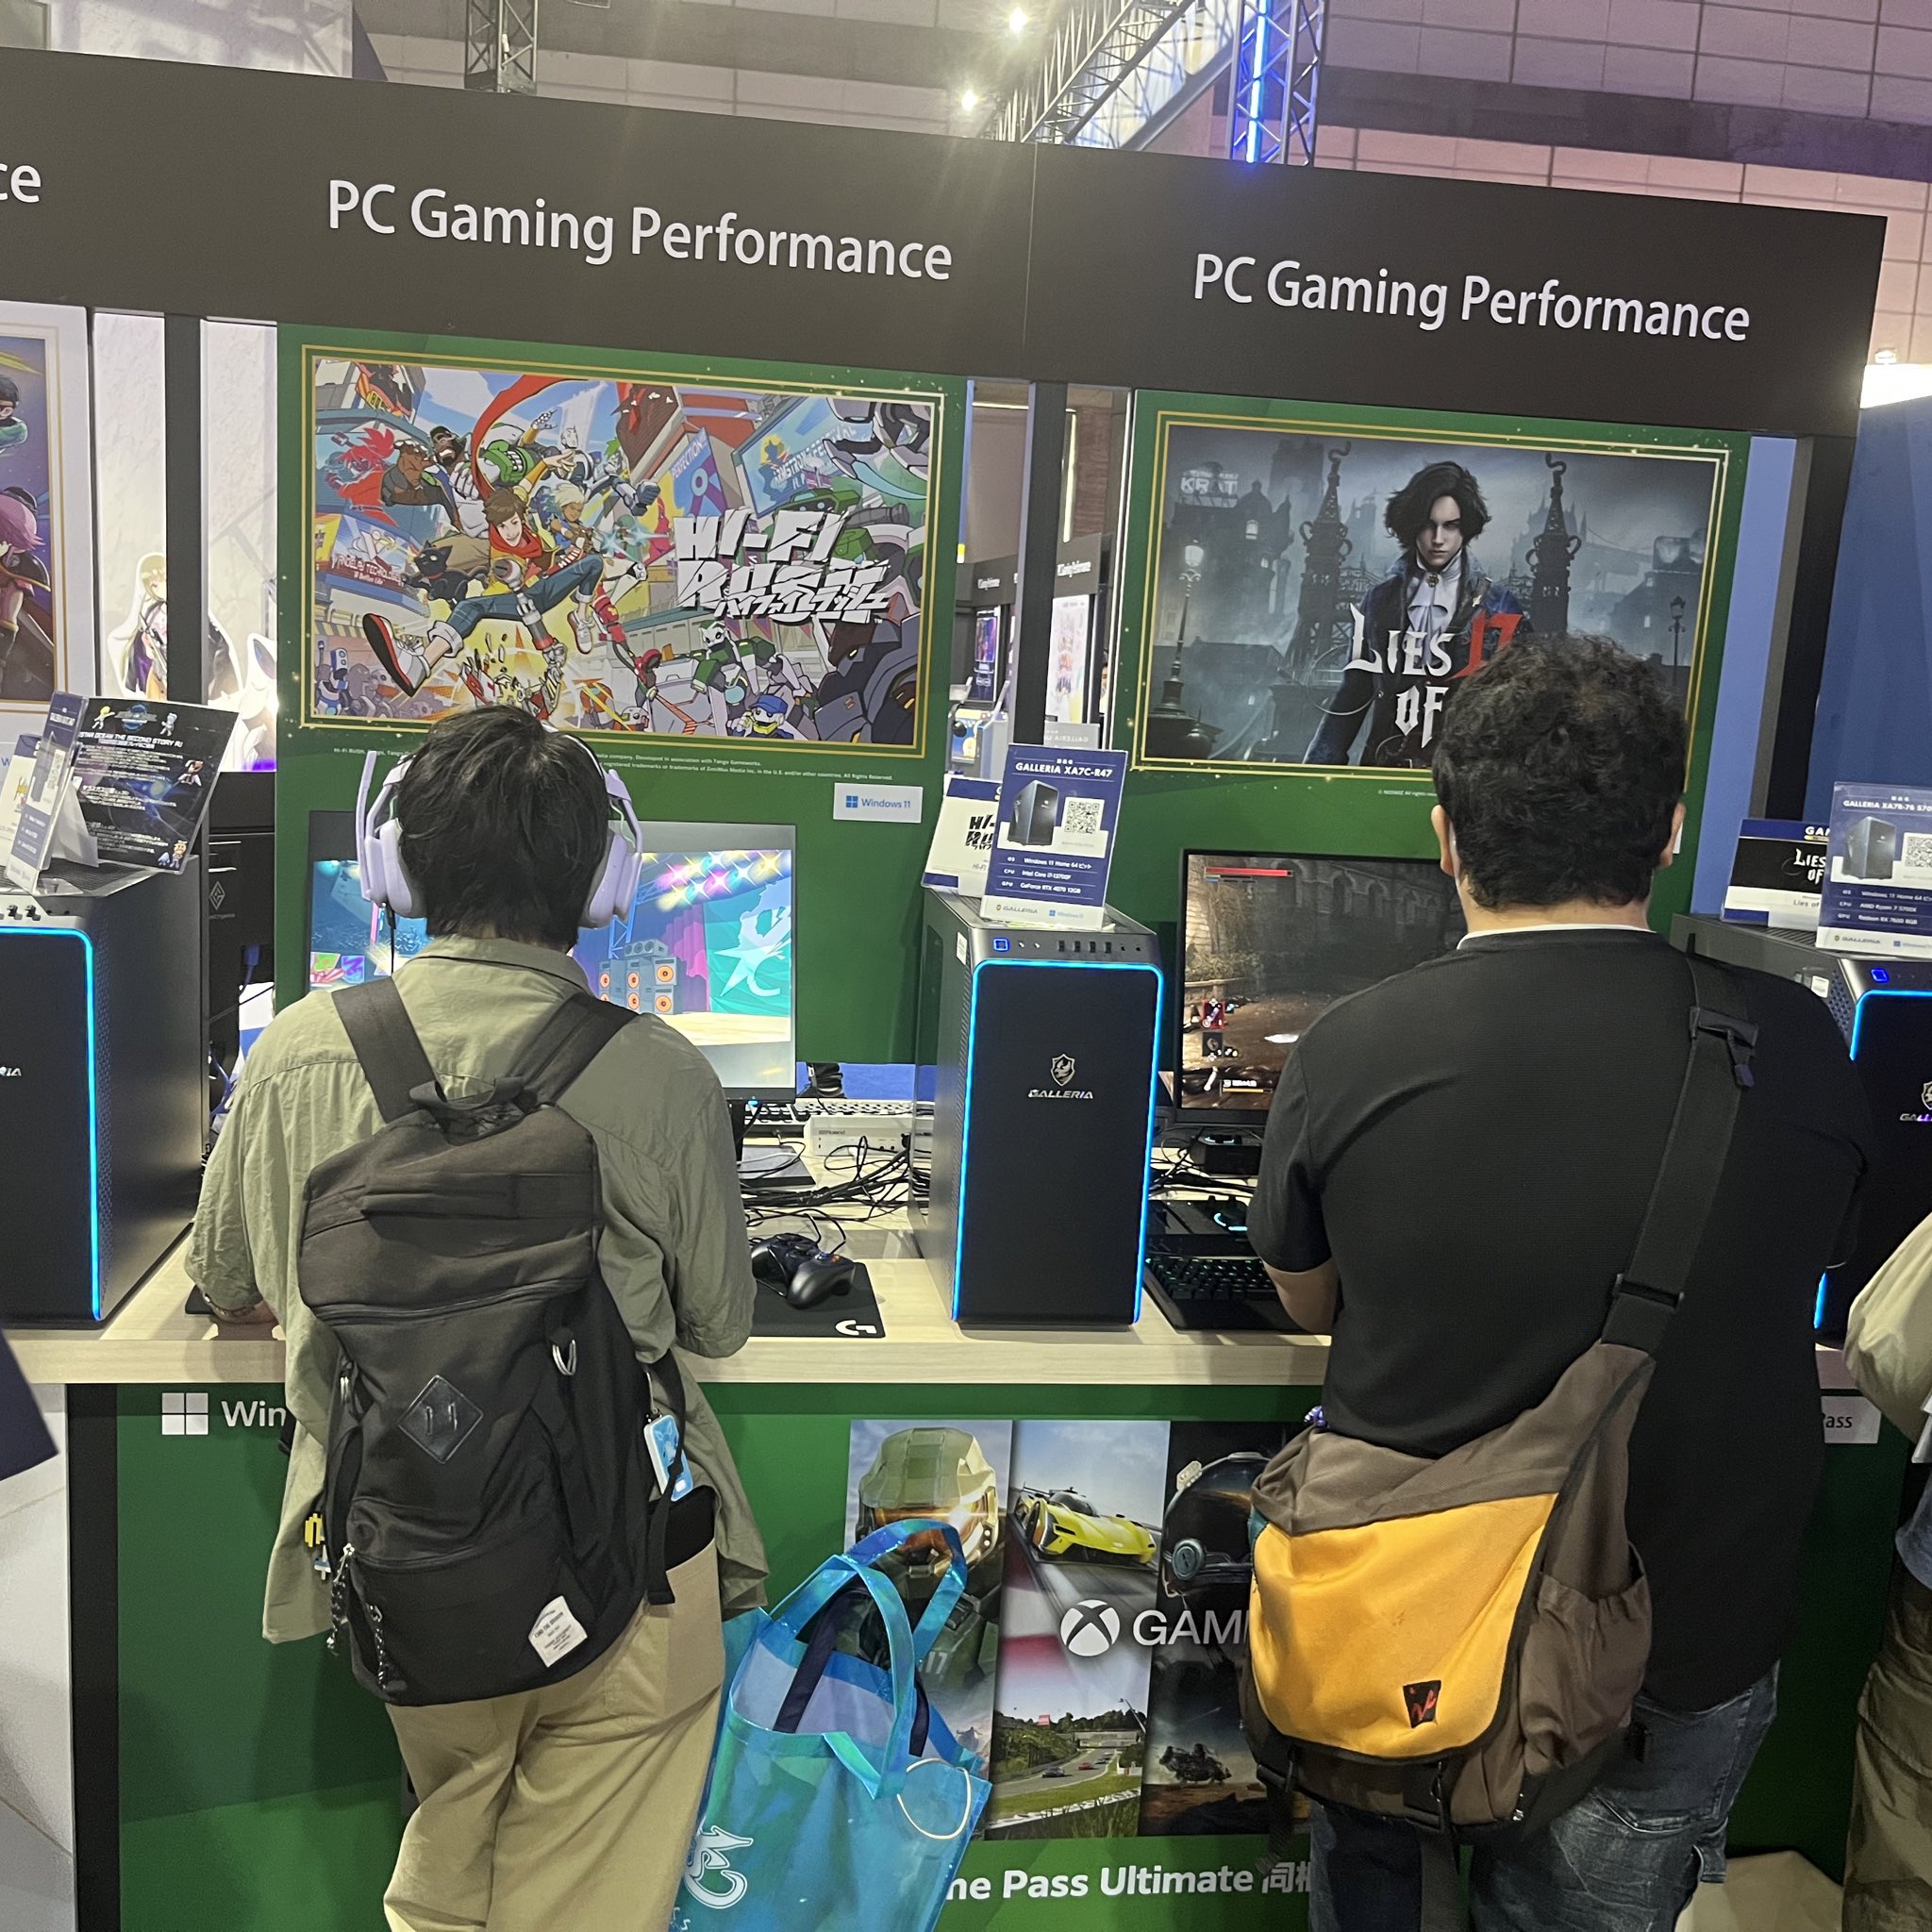 Genki on X: "In the Galleria PC booth they had some Xbox Game